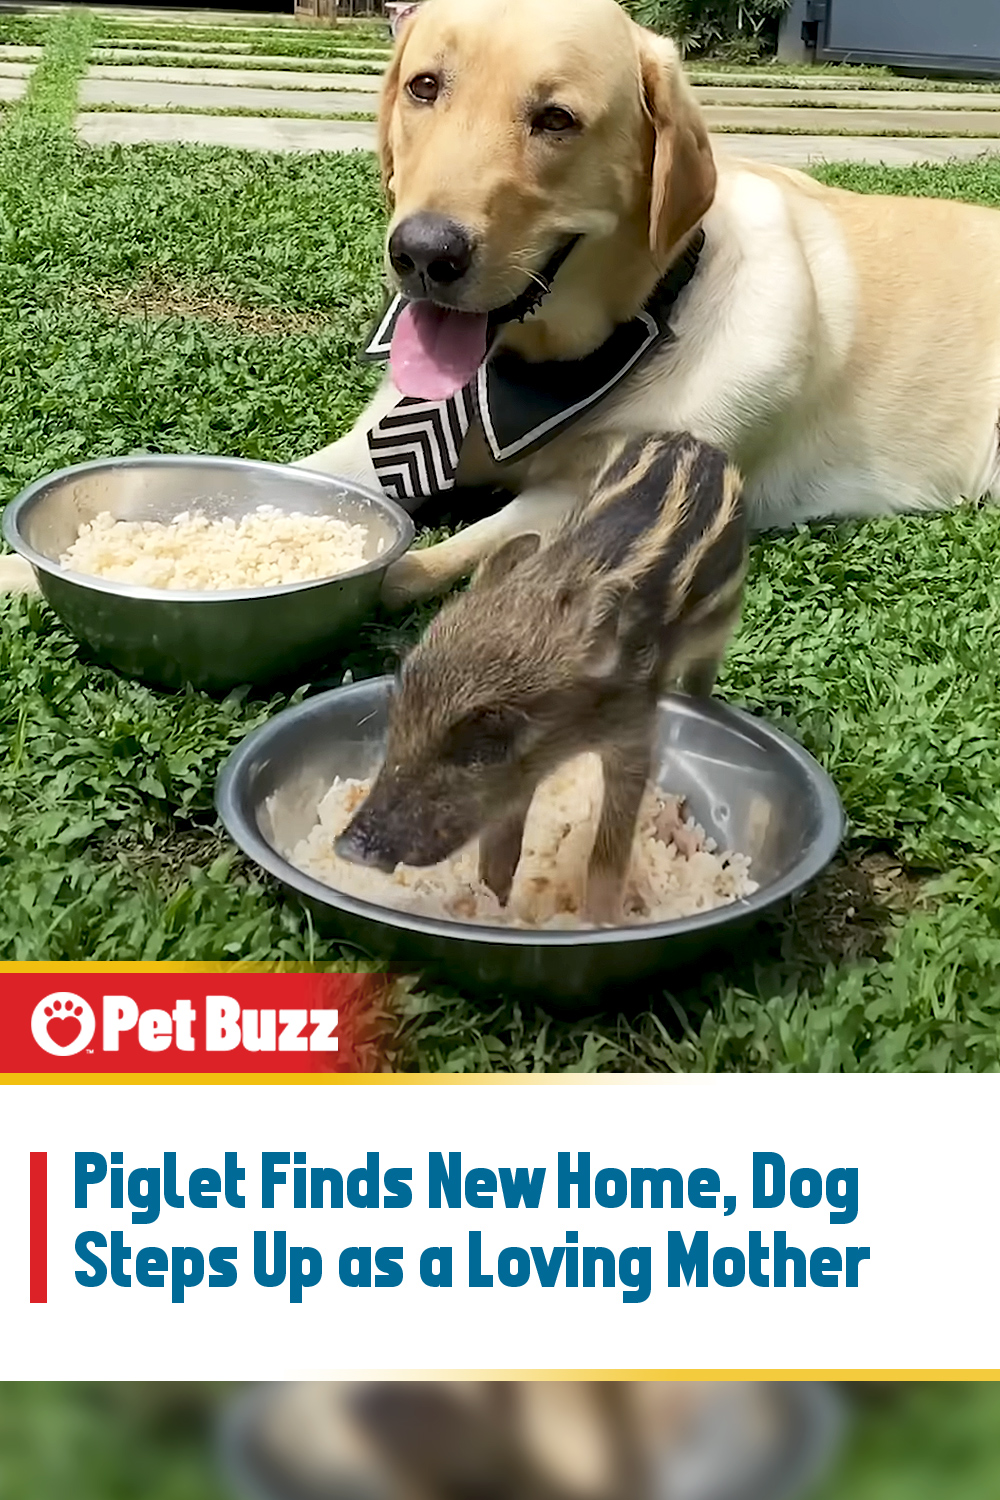 Piglet Finds New Home, Dog Steps Up as a Loving Mother